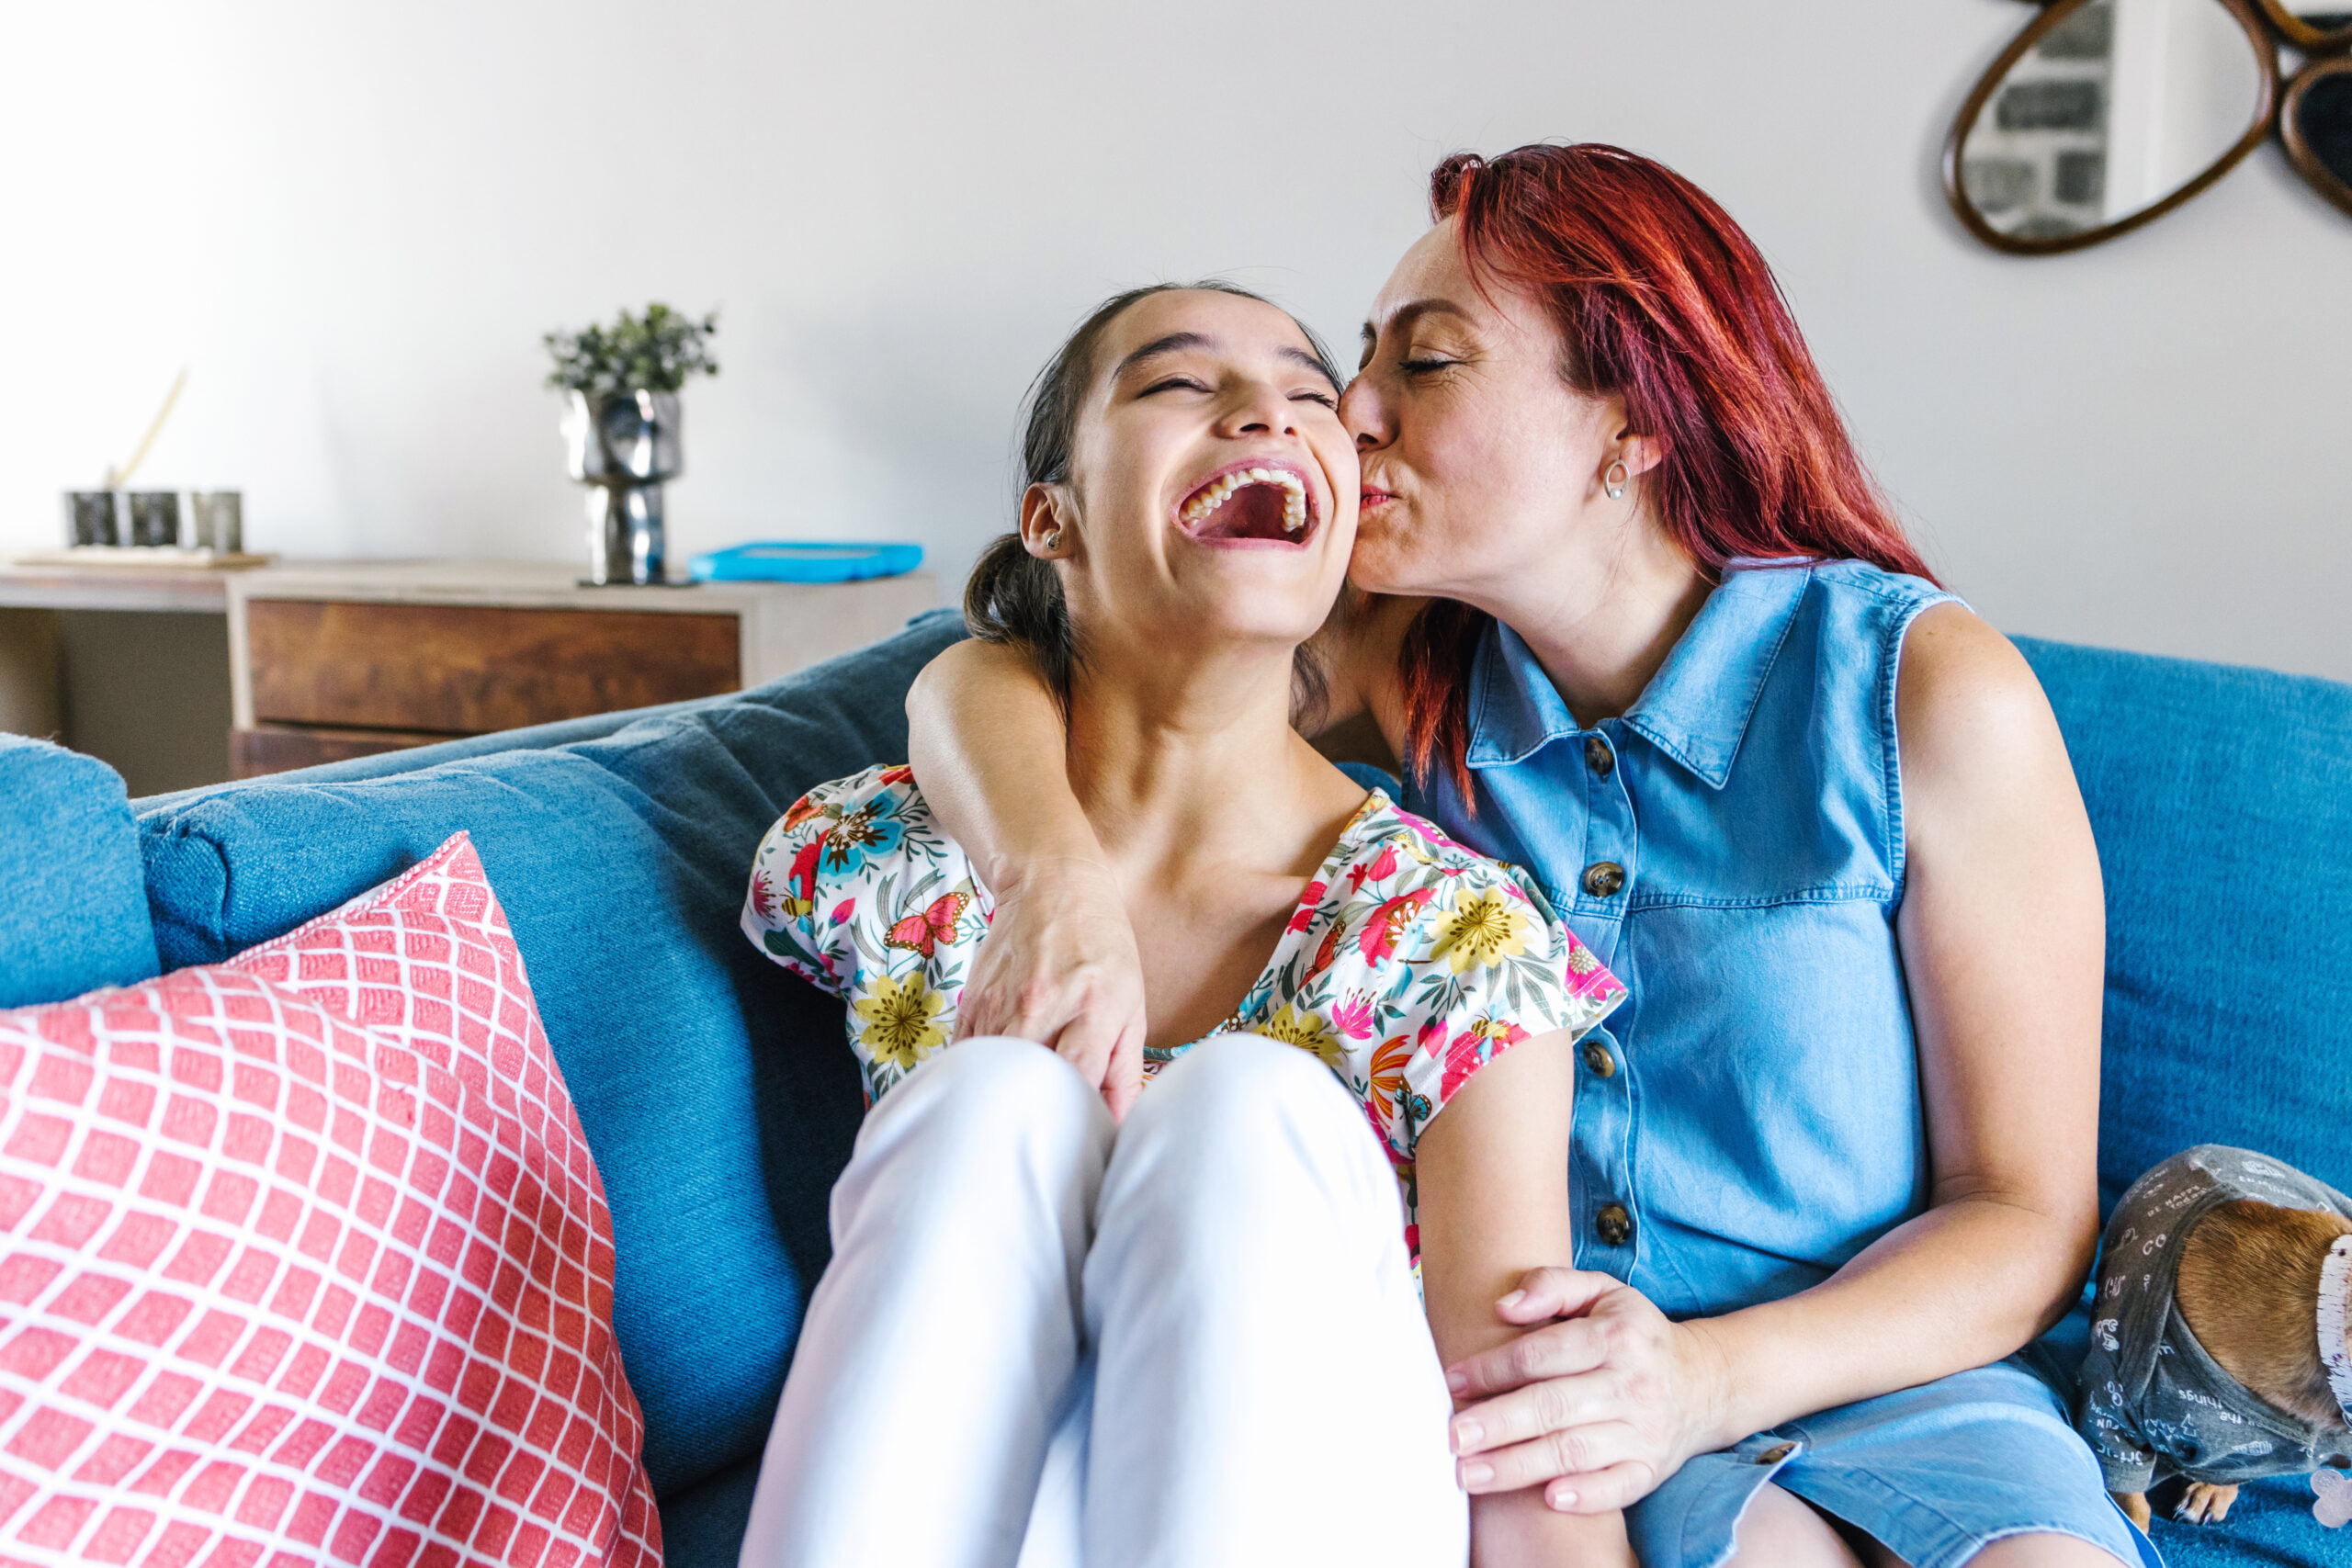 Latin mother and her daughter with cerebral palsy enjoying time together